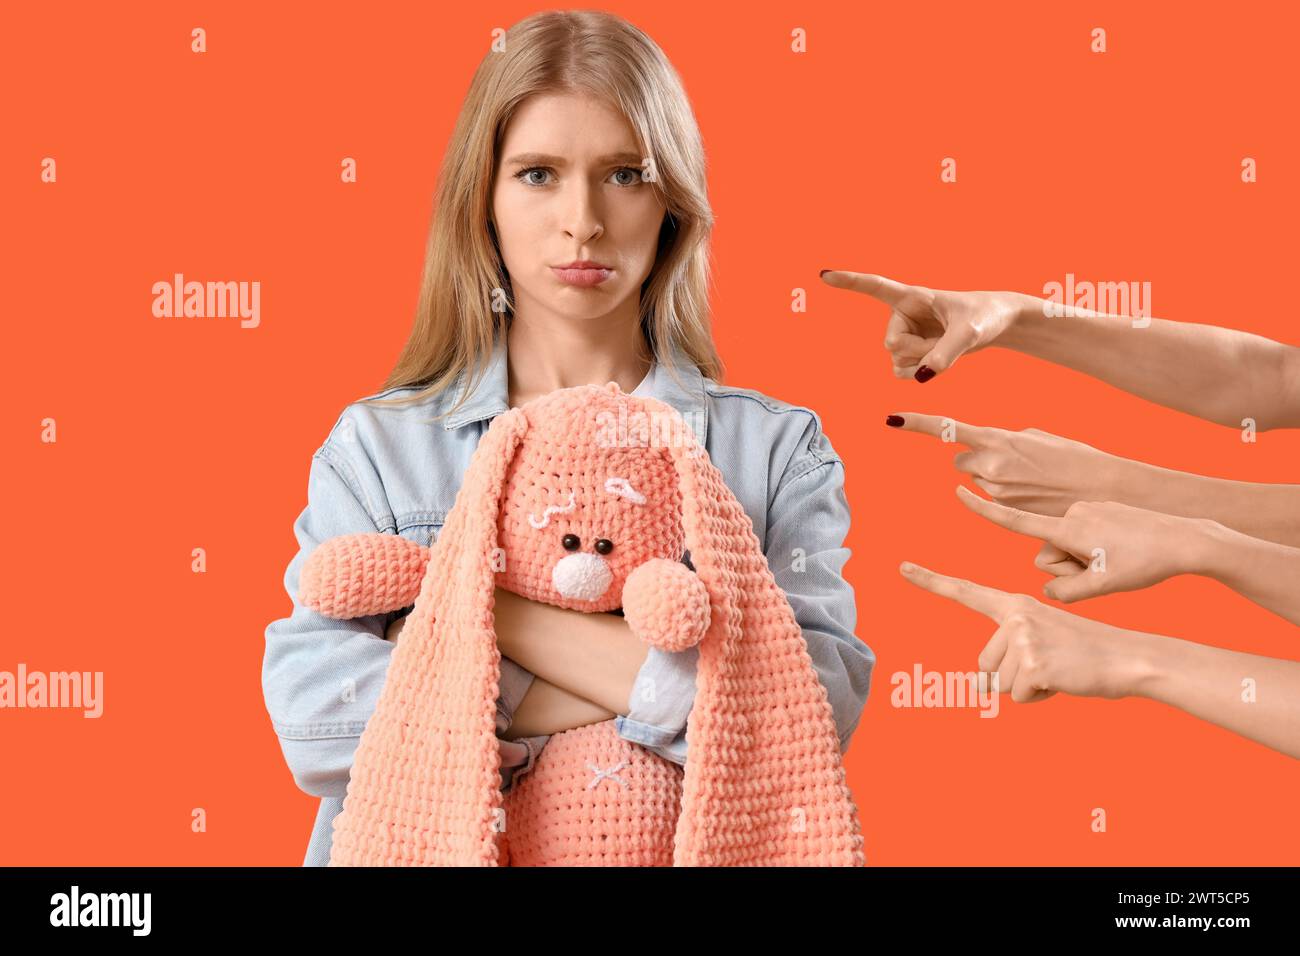 People pointing at upset young woman with toy on orange background. Accusation concept Stock Photo